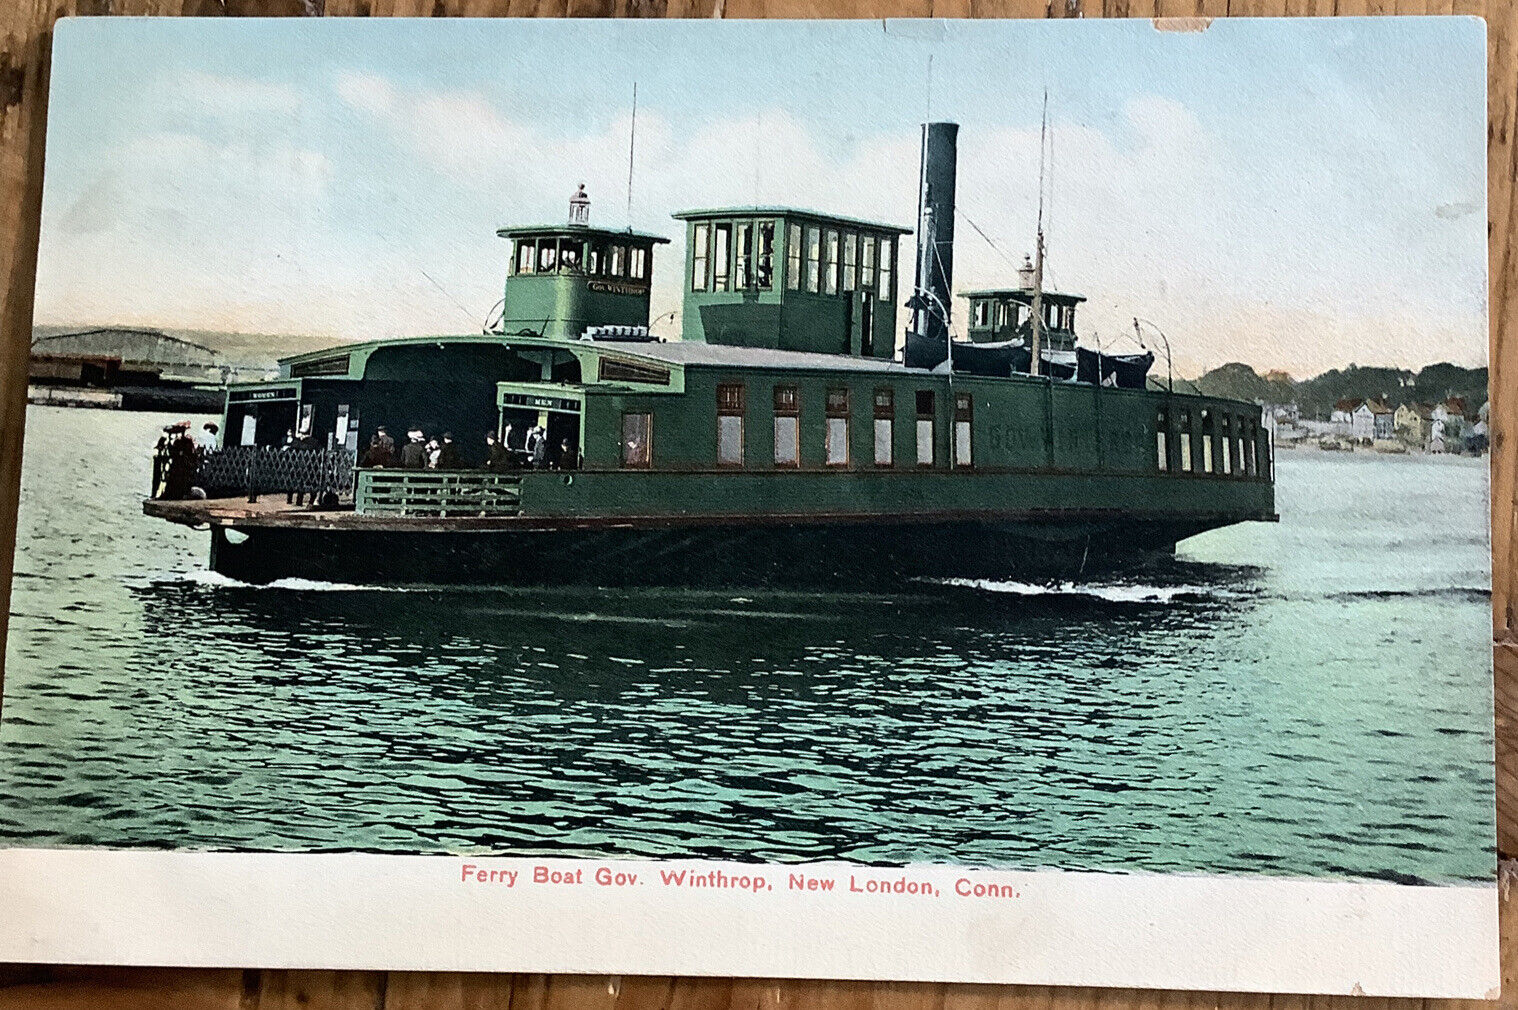 Ferry Boat Gov. Winthrop Between New London & Groton CT Connecticut Postcard